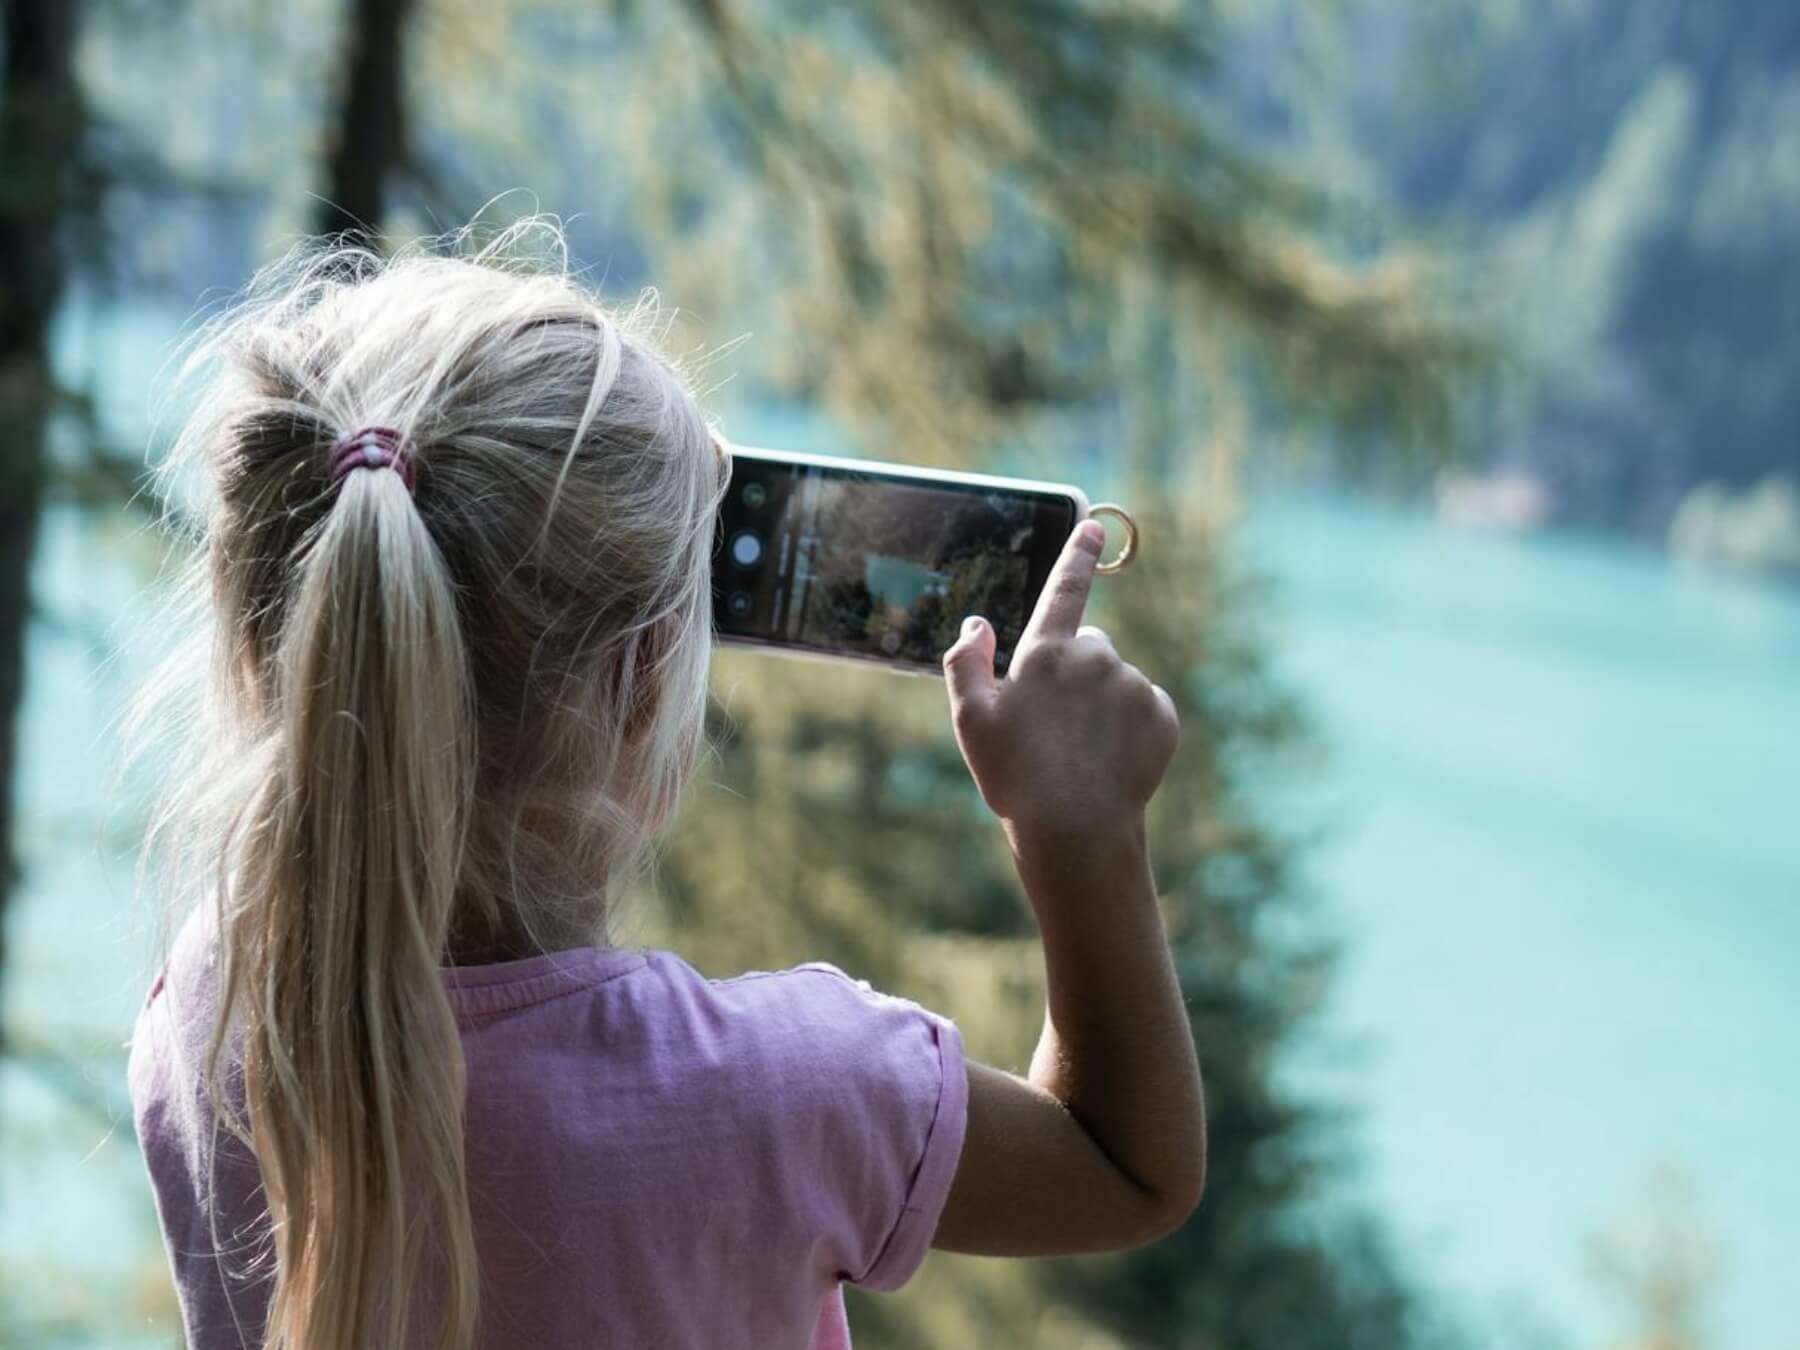 Child taking a photo using a smartphone